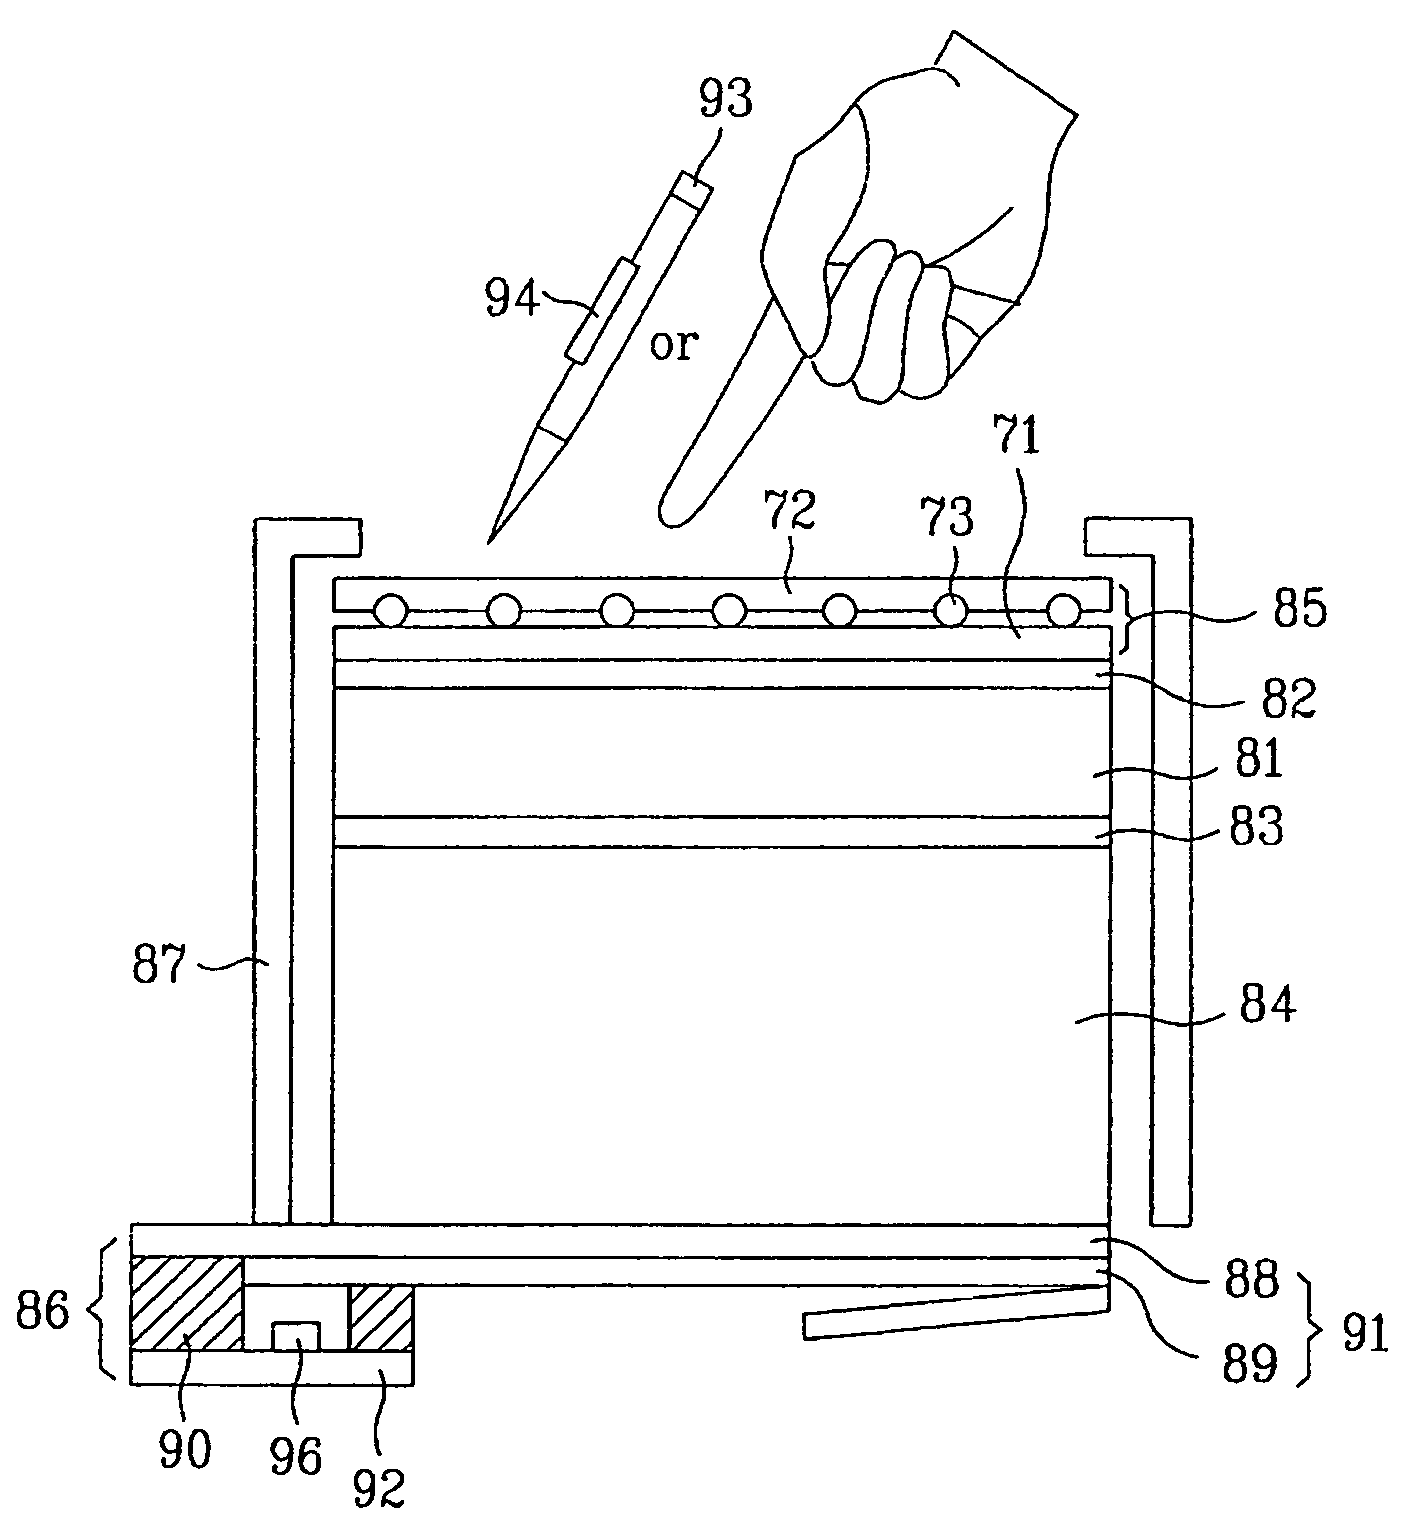 Touch panel for display device